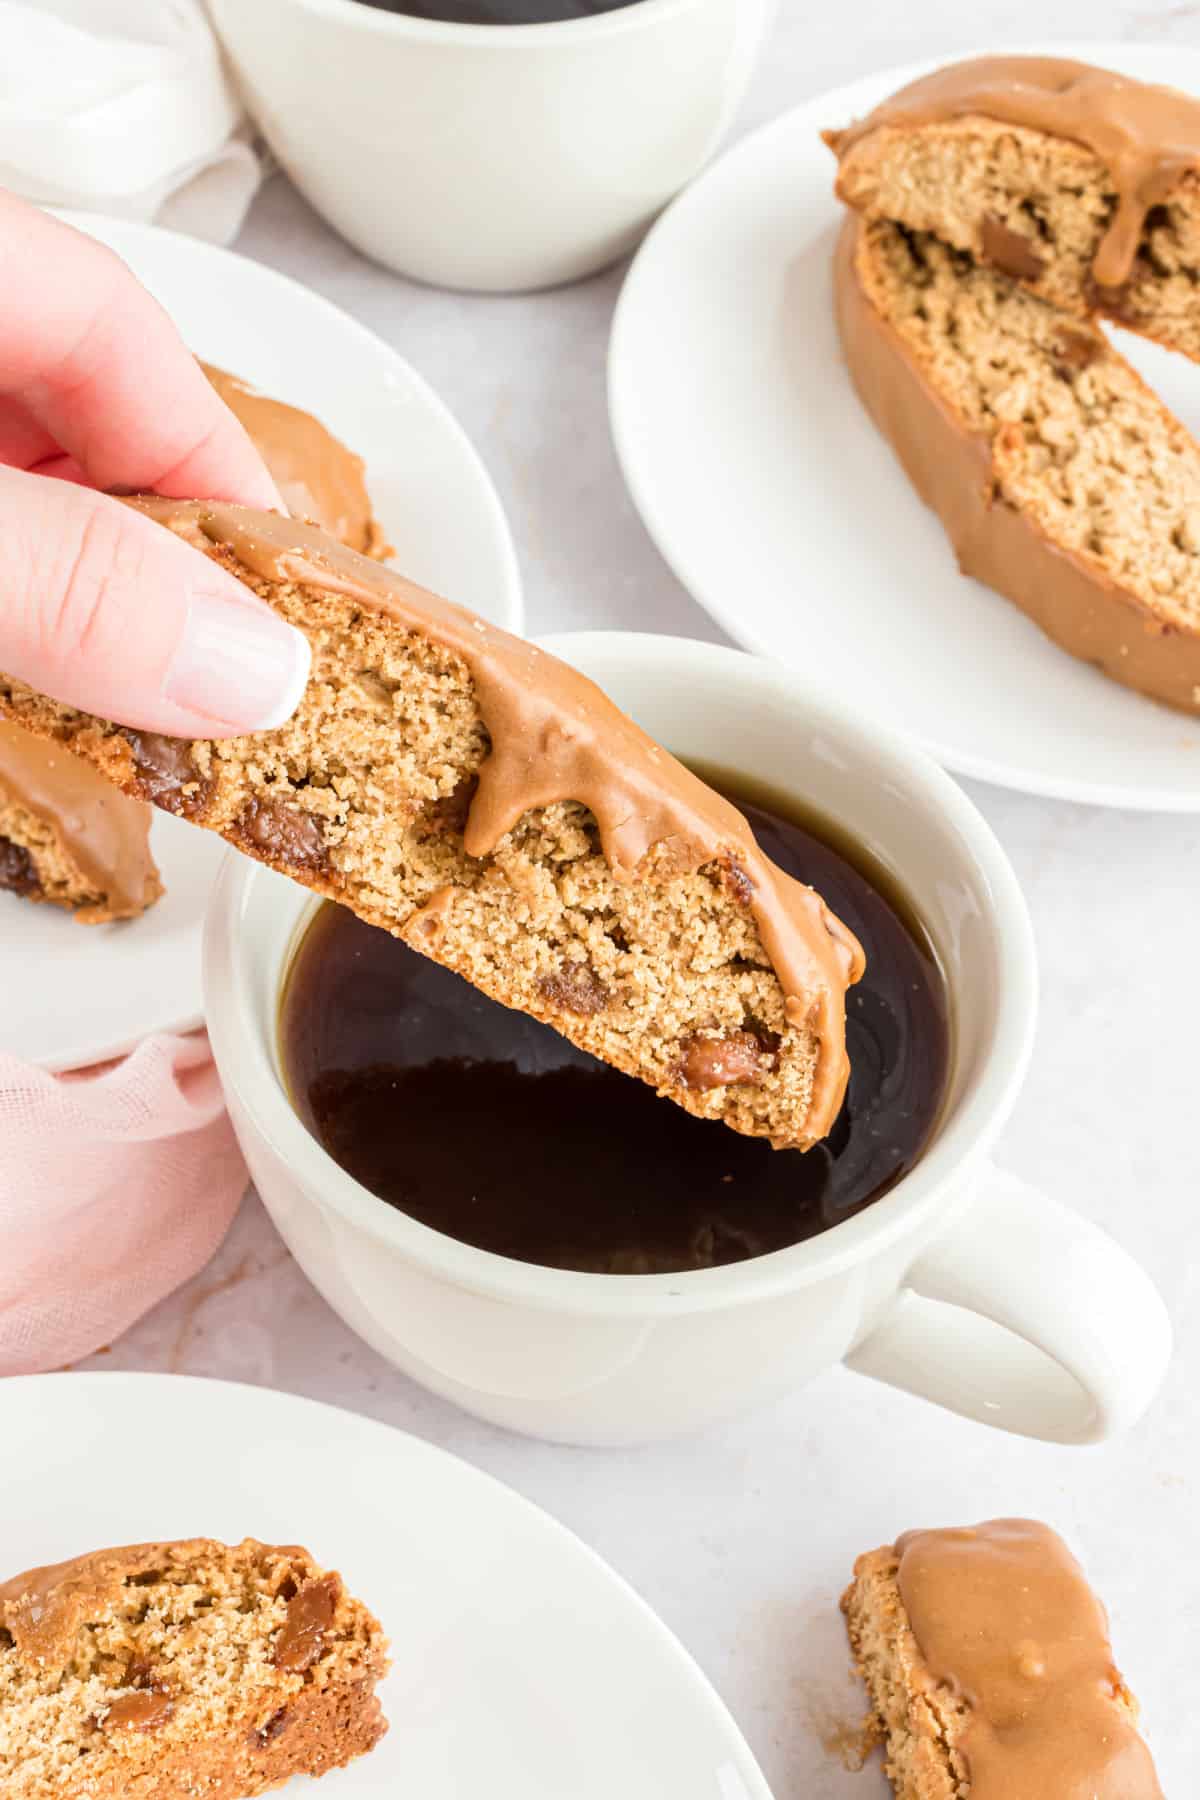 Biscotti being dunked into a small white mug of black coffee.